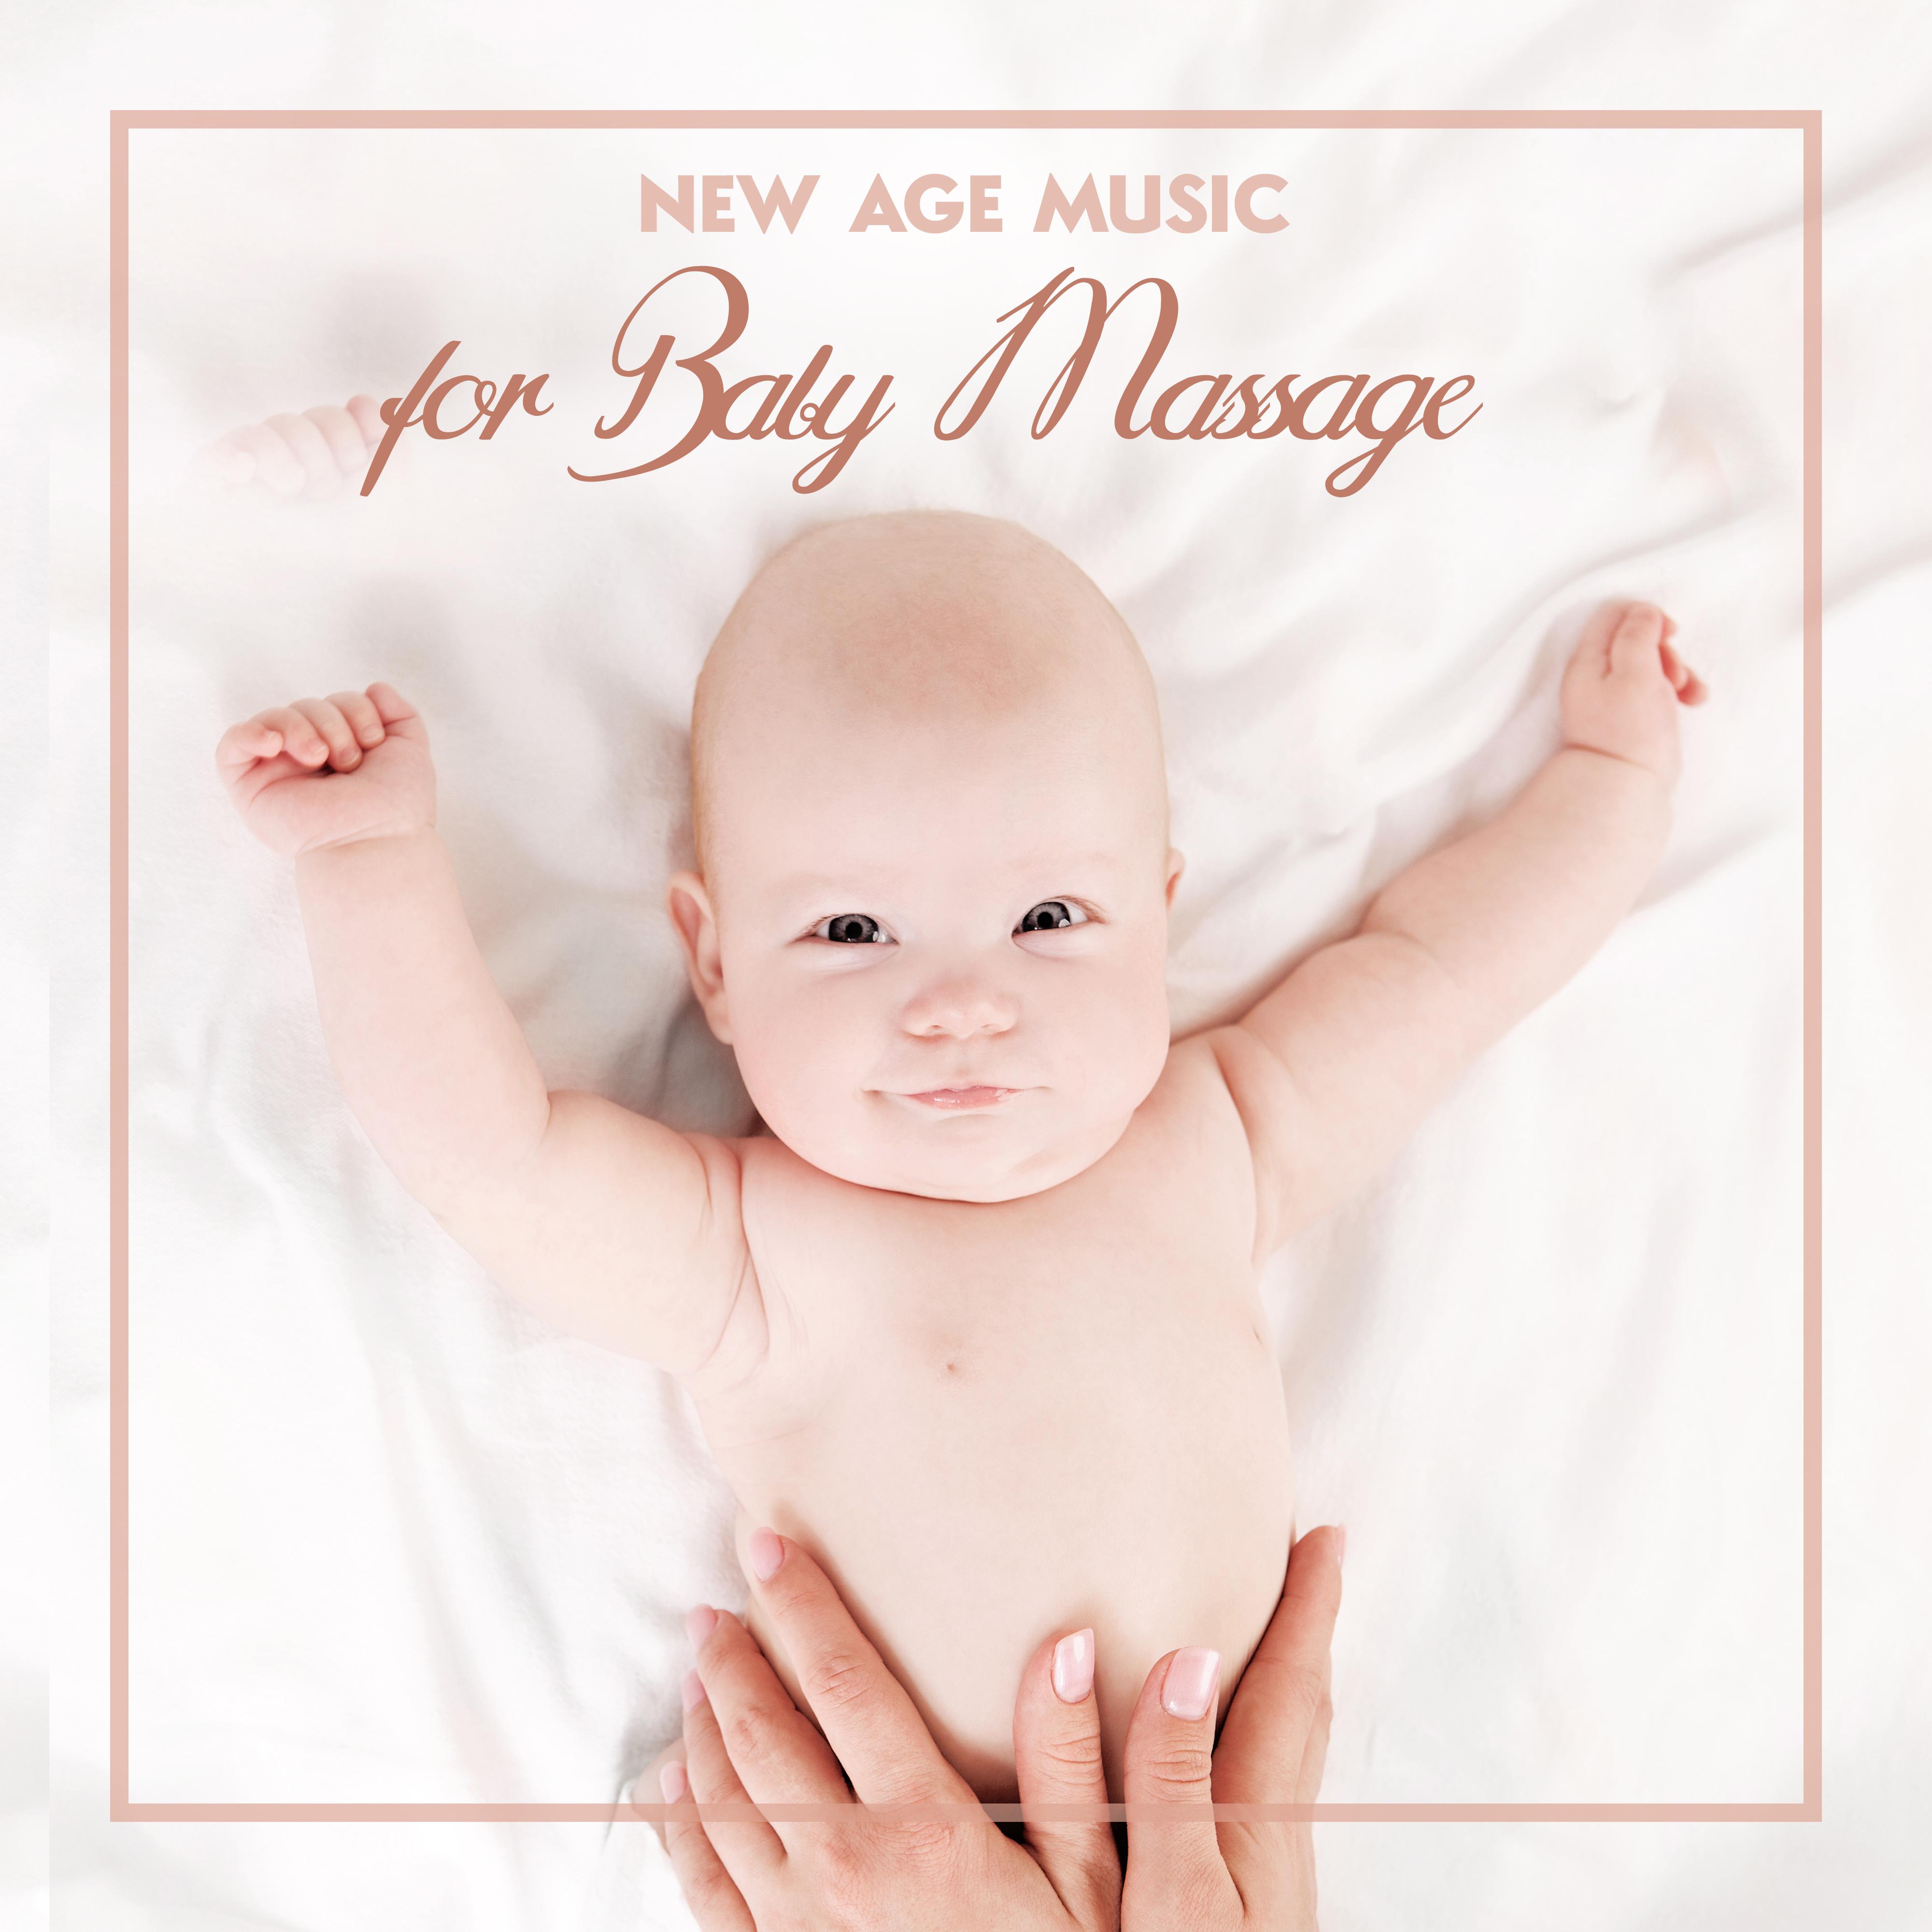 New Age Music for Baby Massage